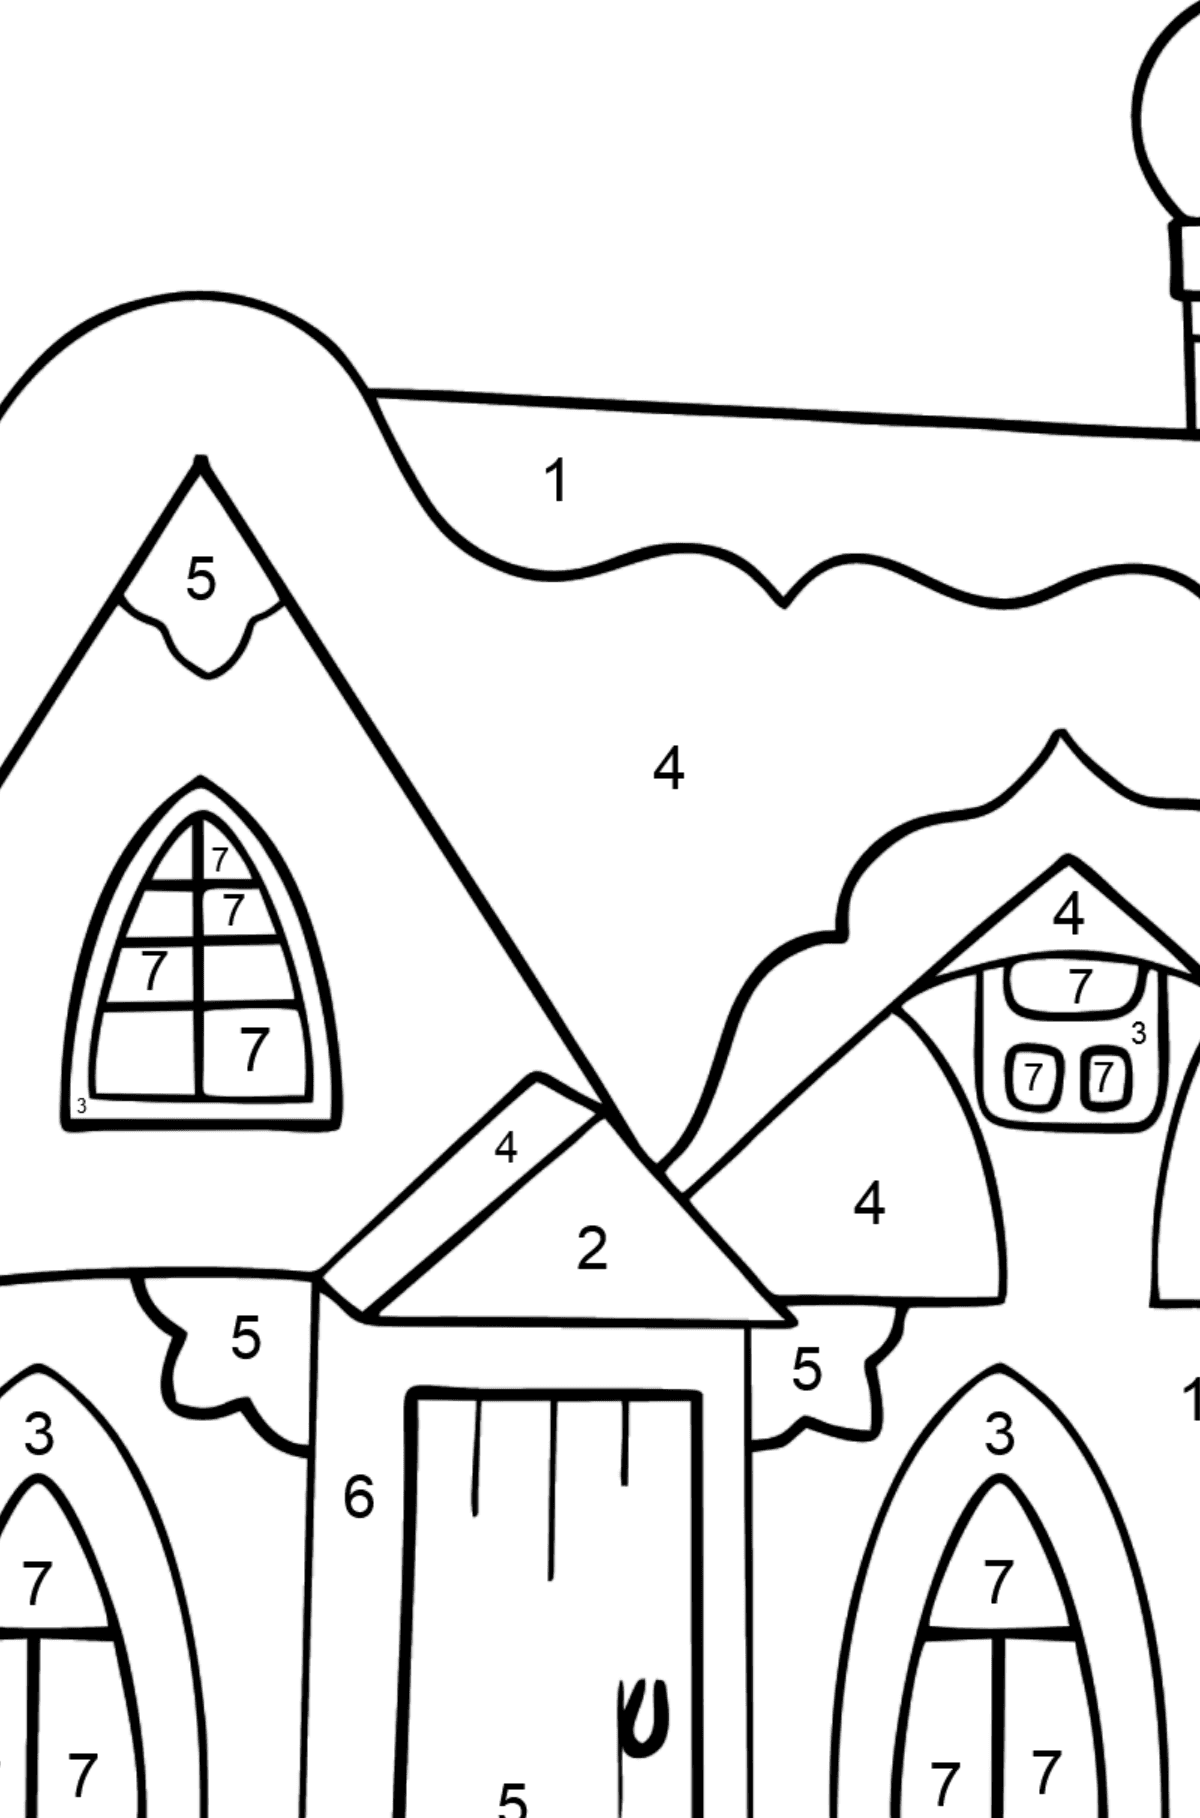 Complex Coloring Page - A Fairytale House - Coloring by Numbers for Kids